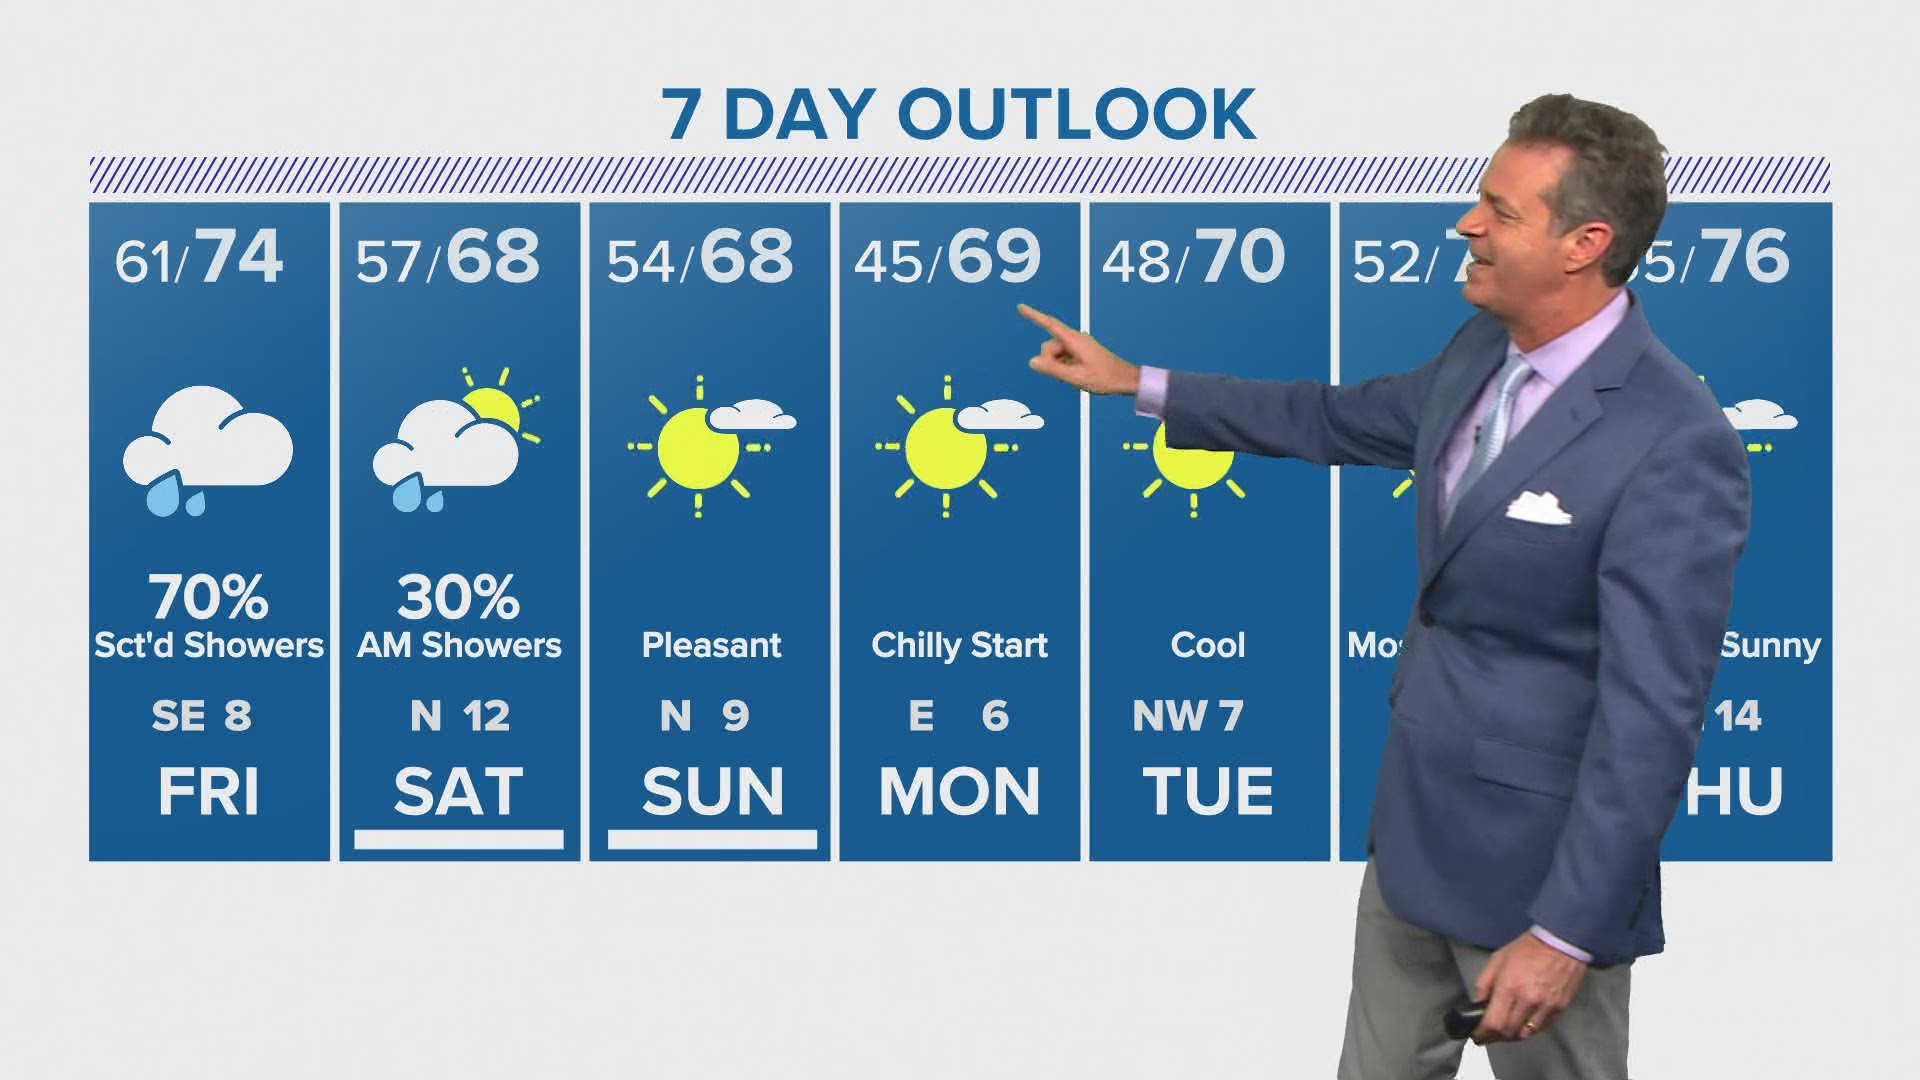 Friday will be rainy, but cooler temps and sunny skies move in by the end of the weekend, according to KHOU 11 Chief Meteorologist David Paul.